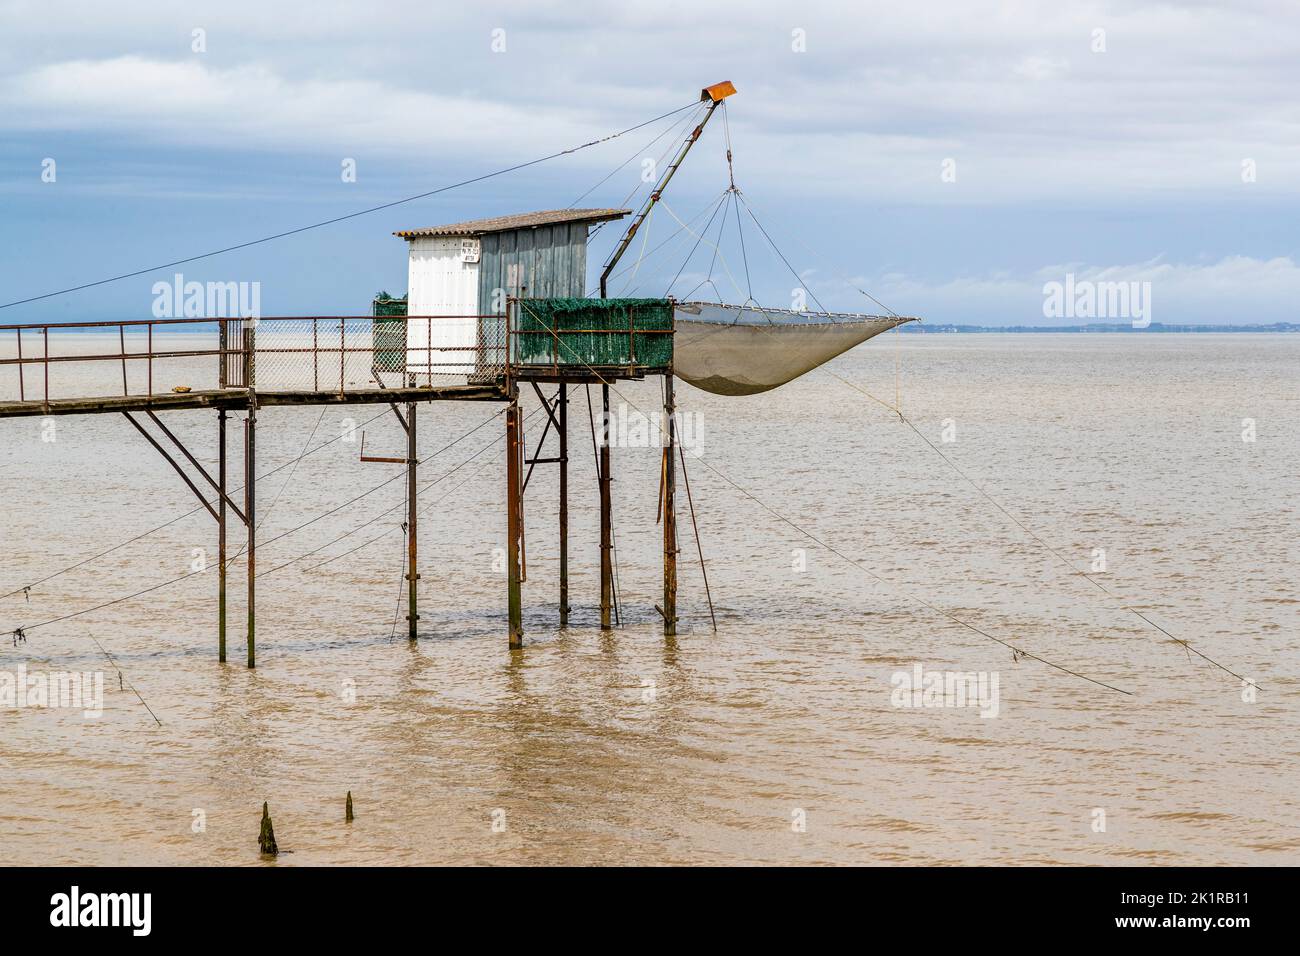 Le Carrelet are called the fishing huts on stilts at the mouth of the Gironde. Goulée, Lesparre-Médoc, France Stock Photo